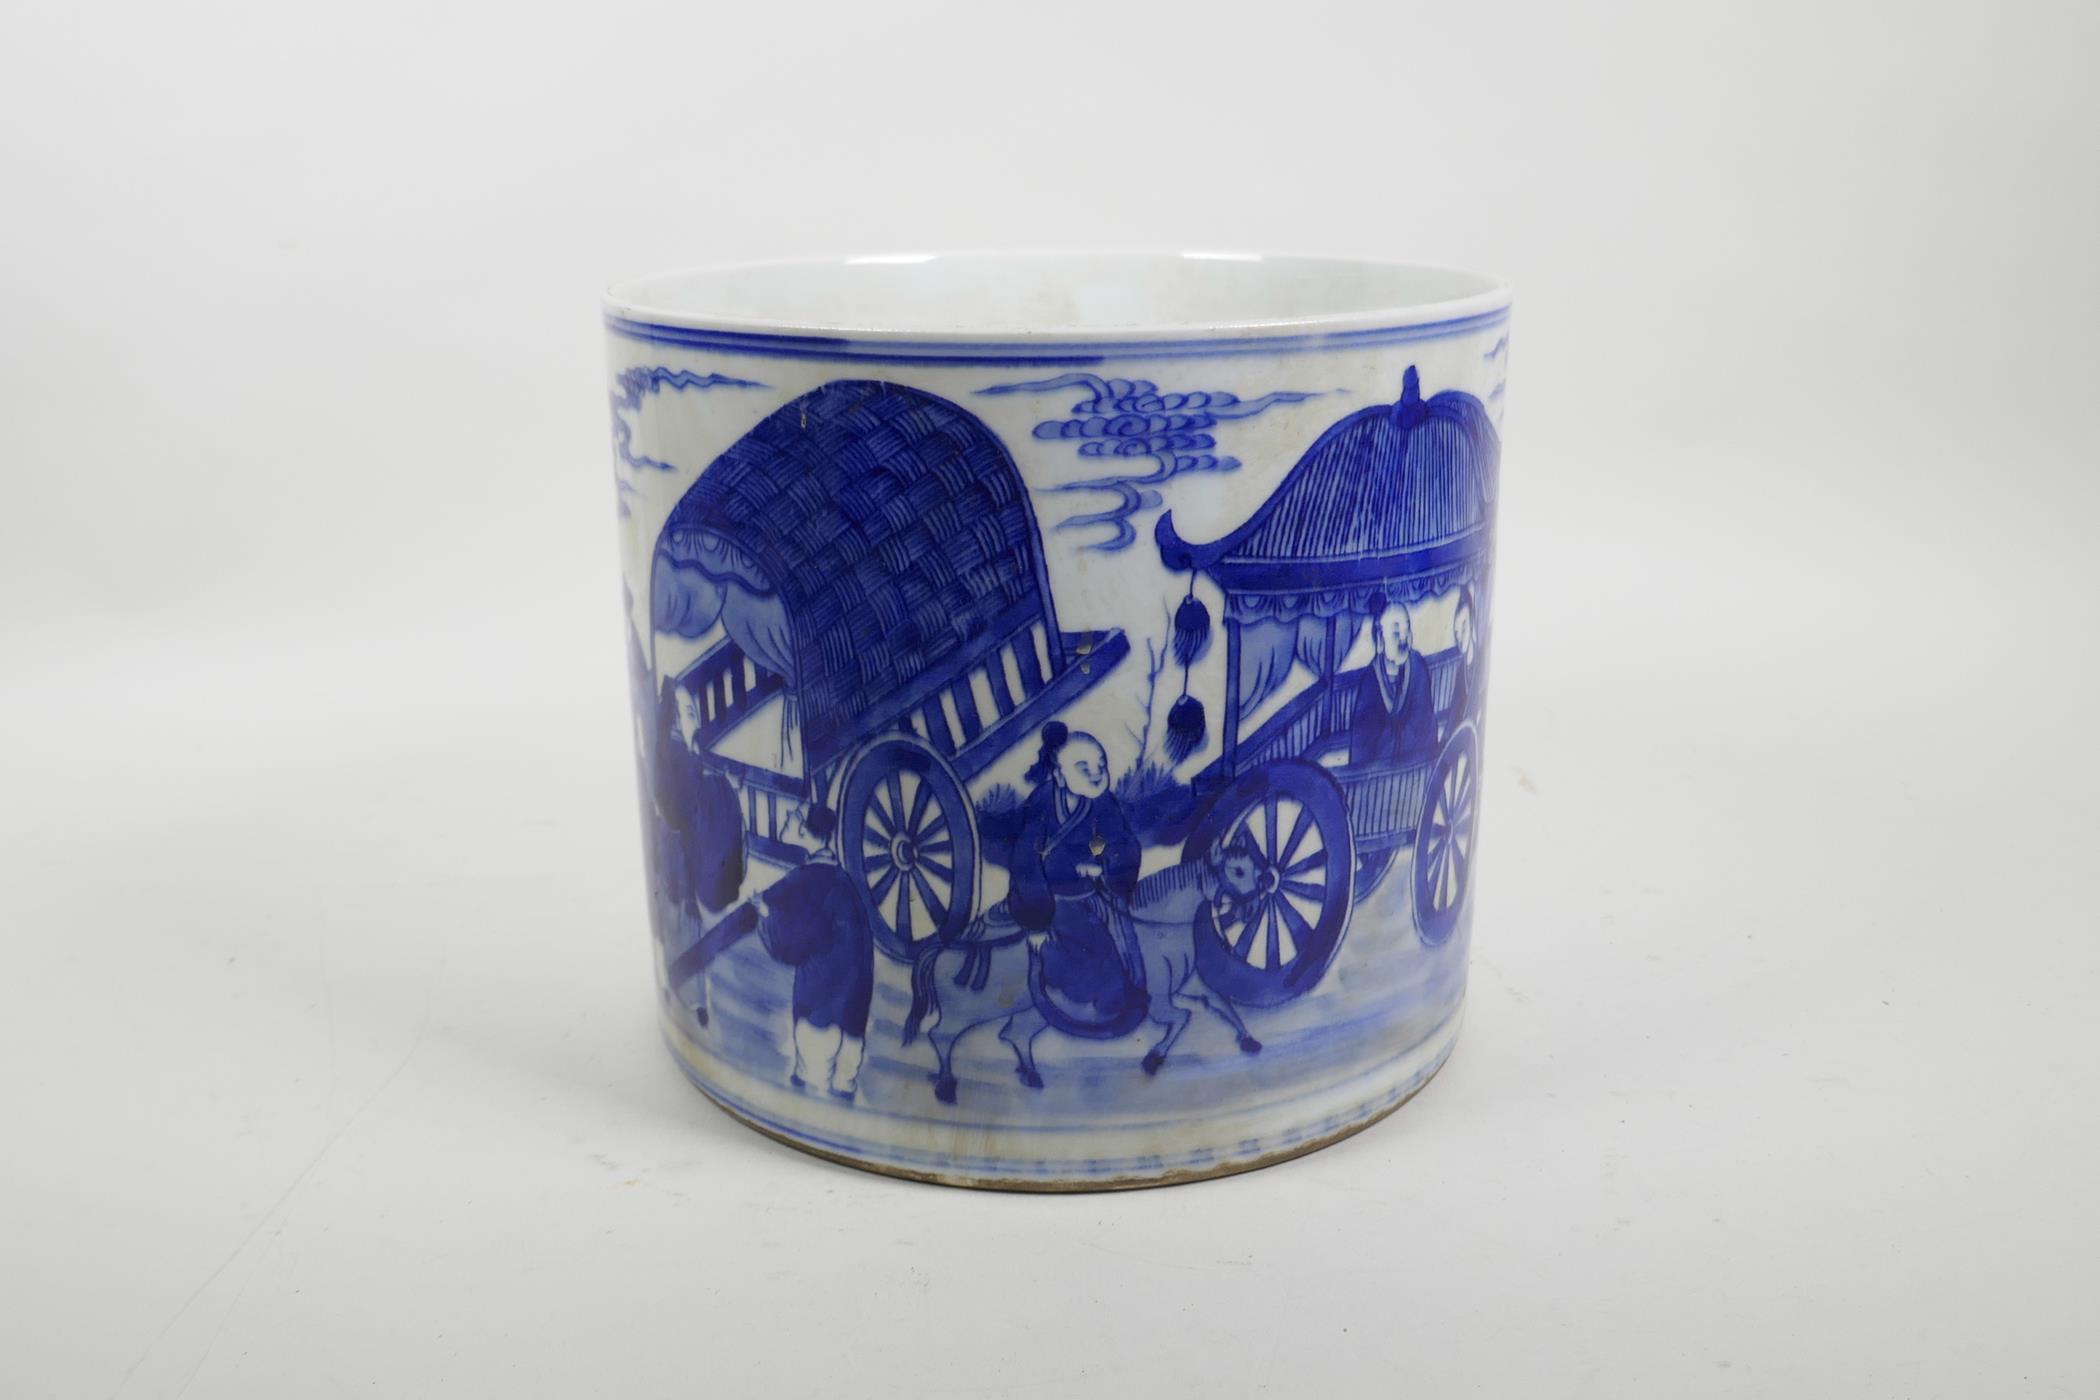 A Chinese blue and white porcelain brush pot decorated with a procession of carts and figures riding